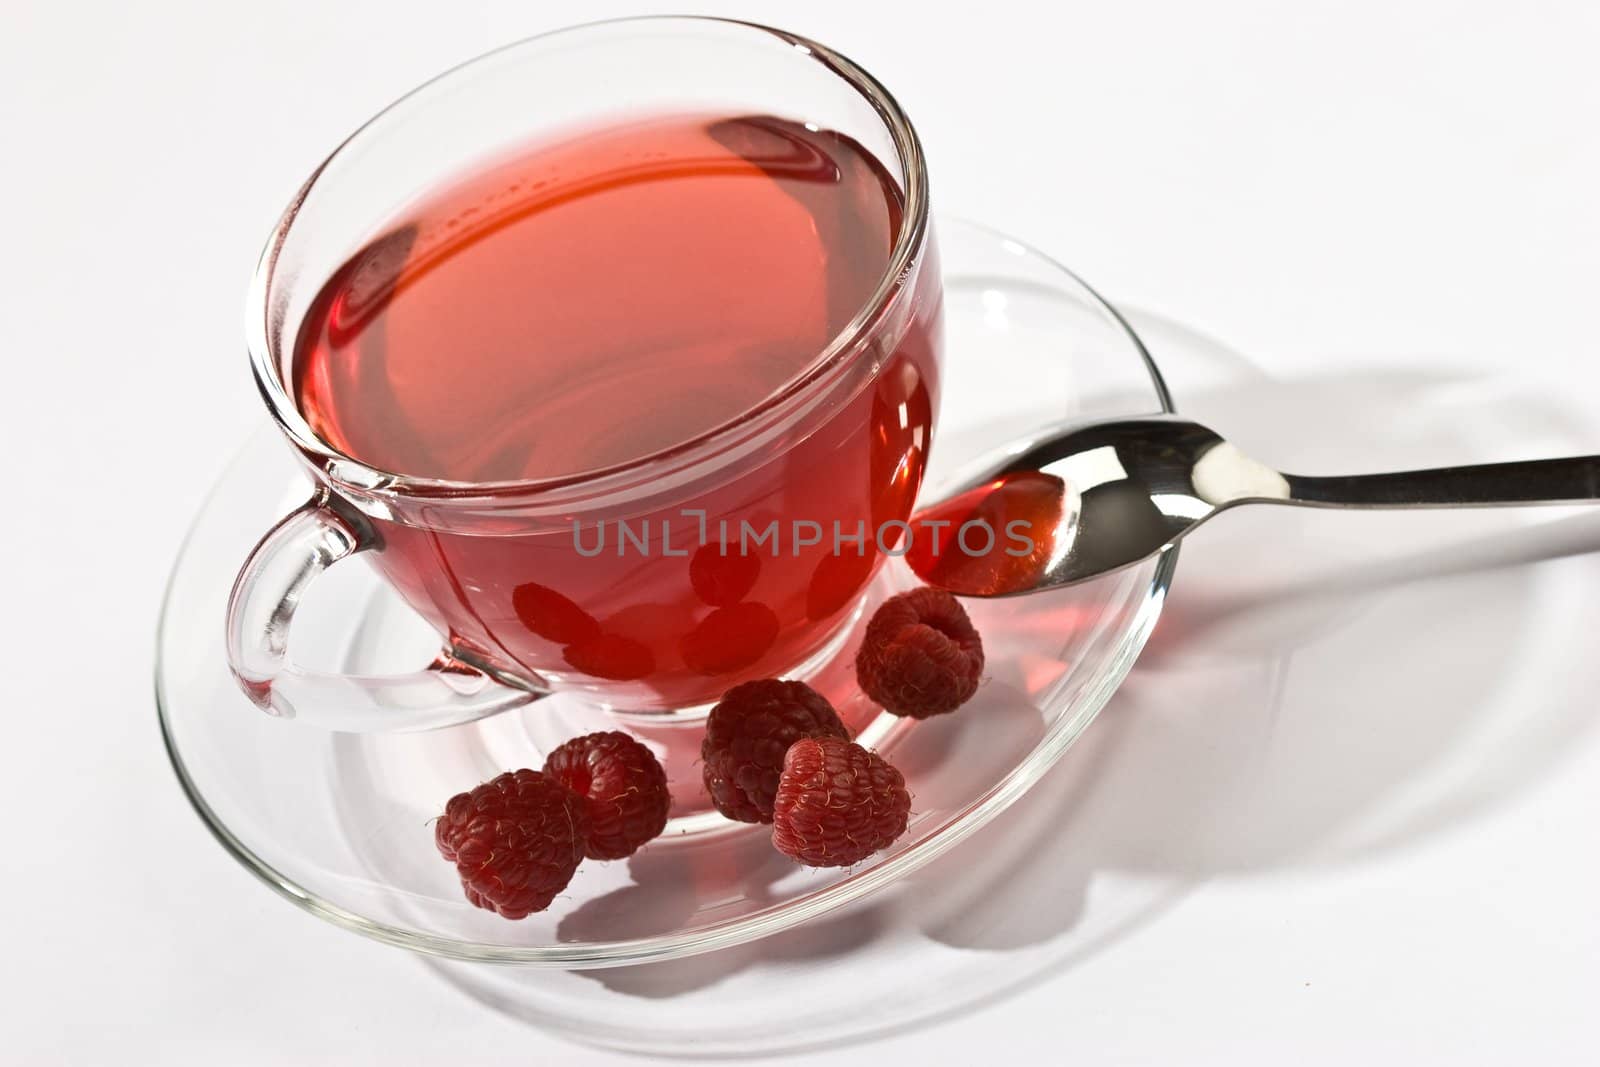 Cup of tea with raspberry syrup and some raspberries